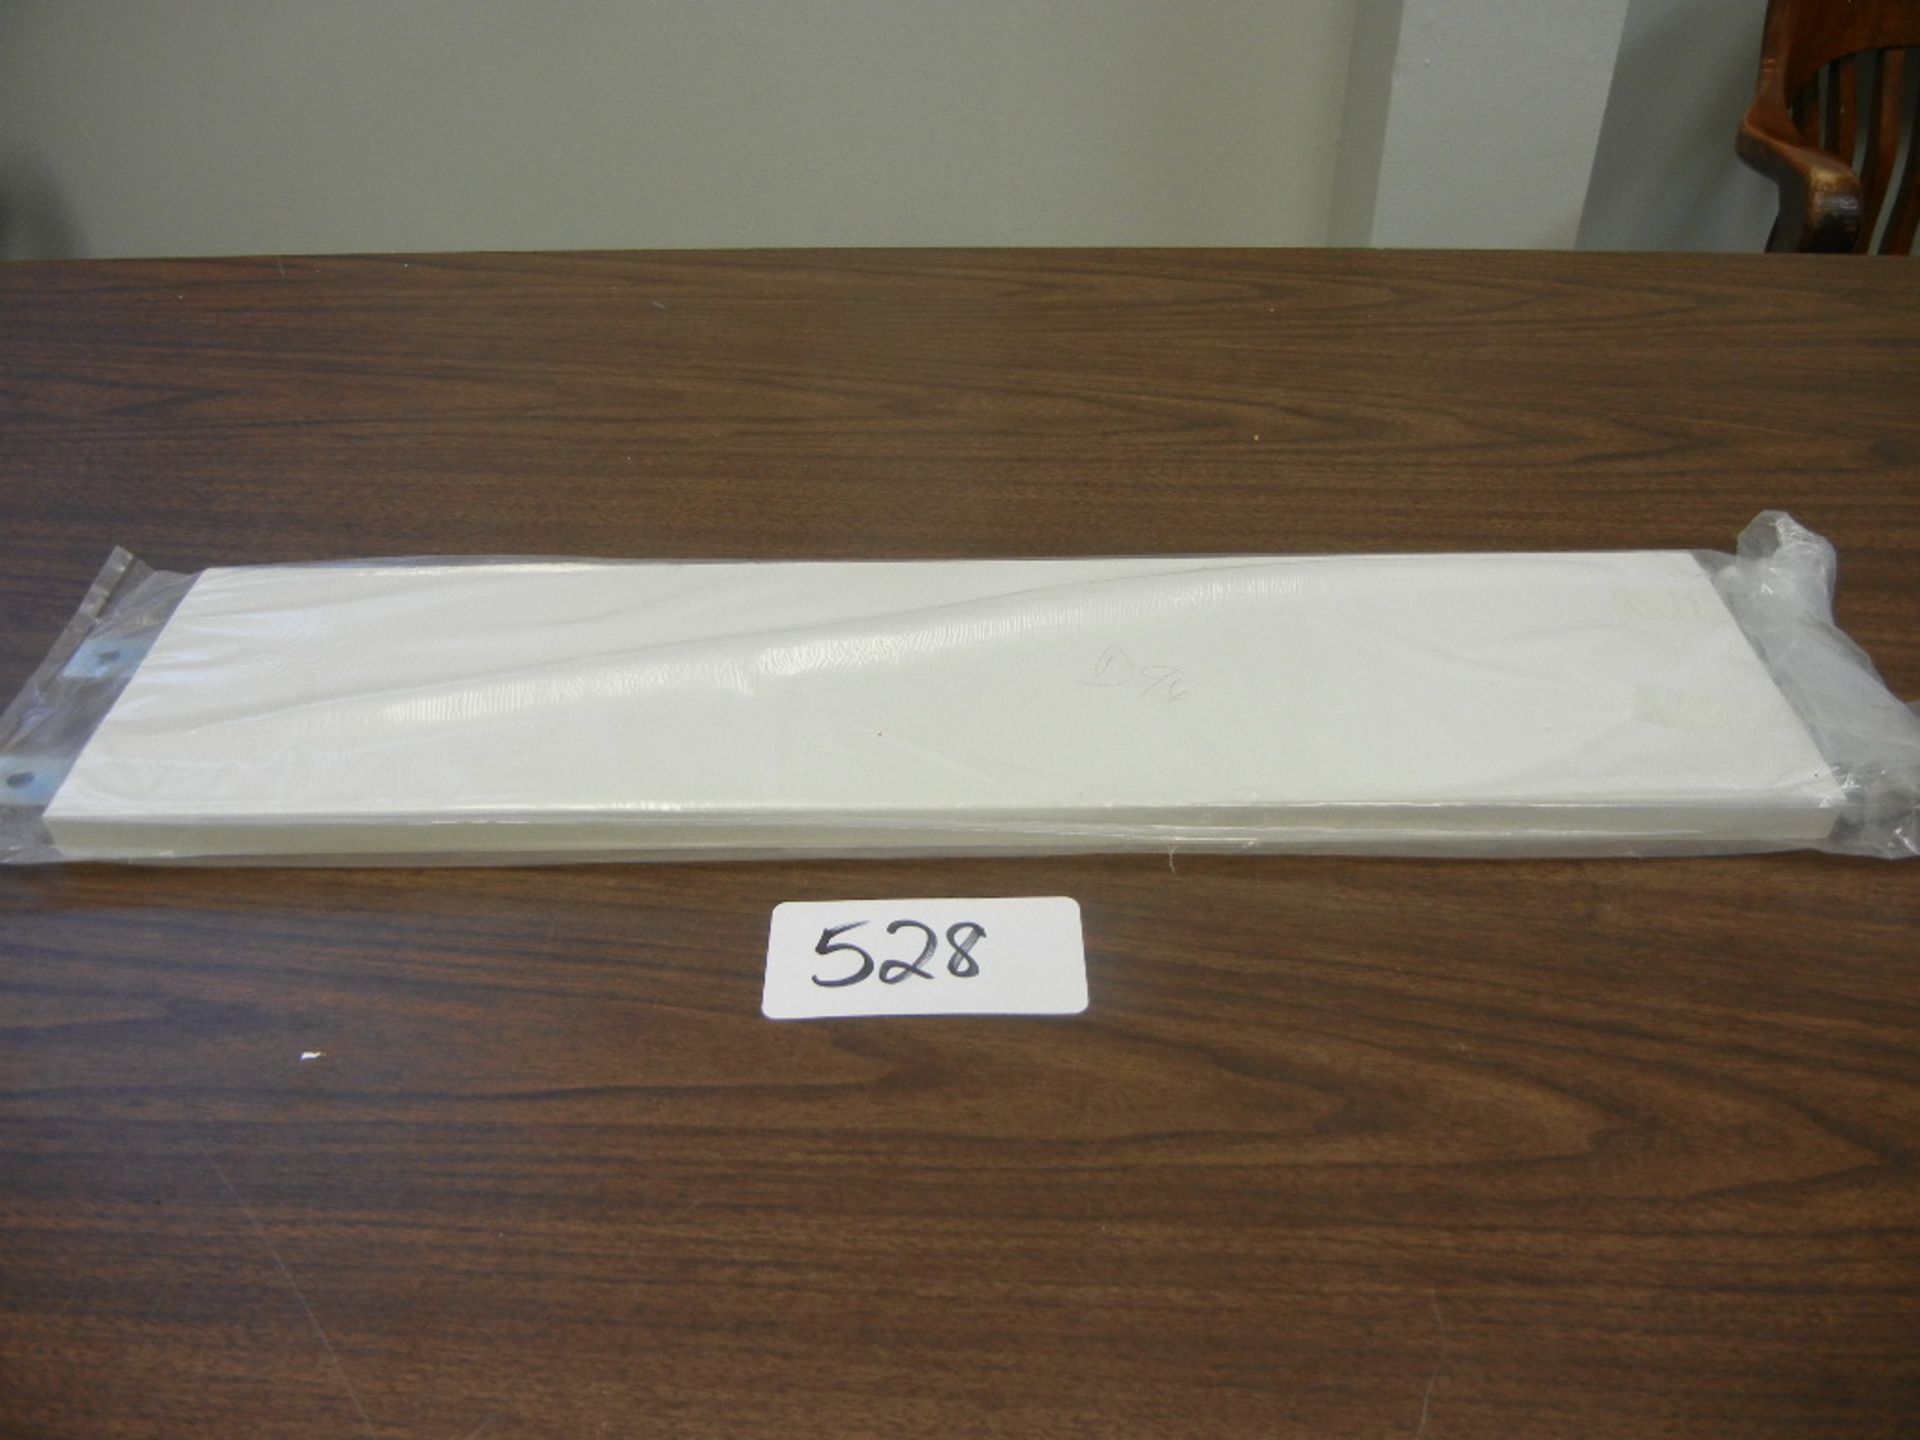 Official Size Pitching Rubber, 6"x24" Nail in Sides